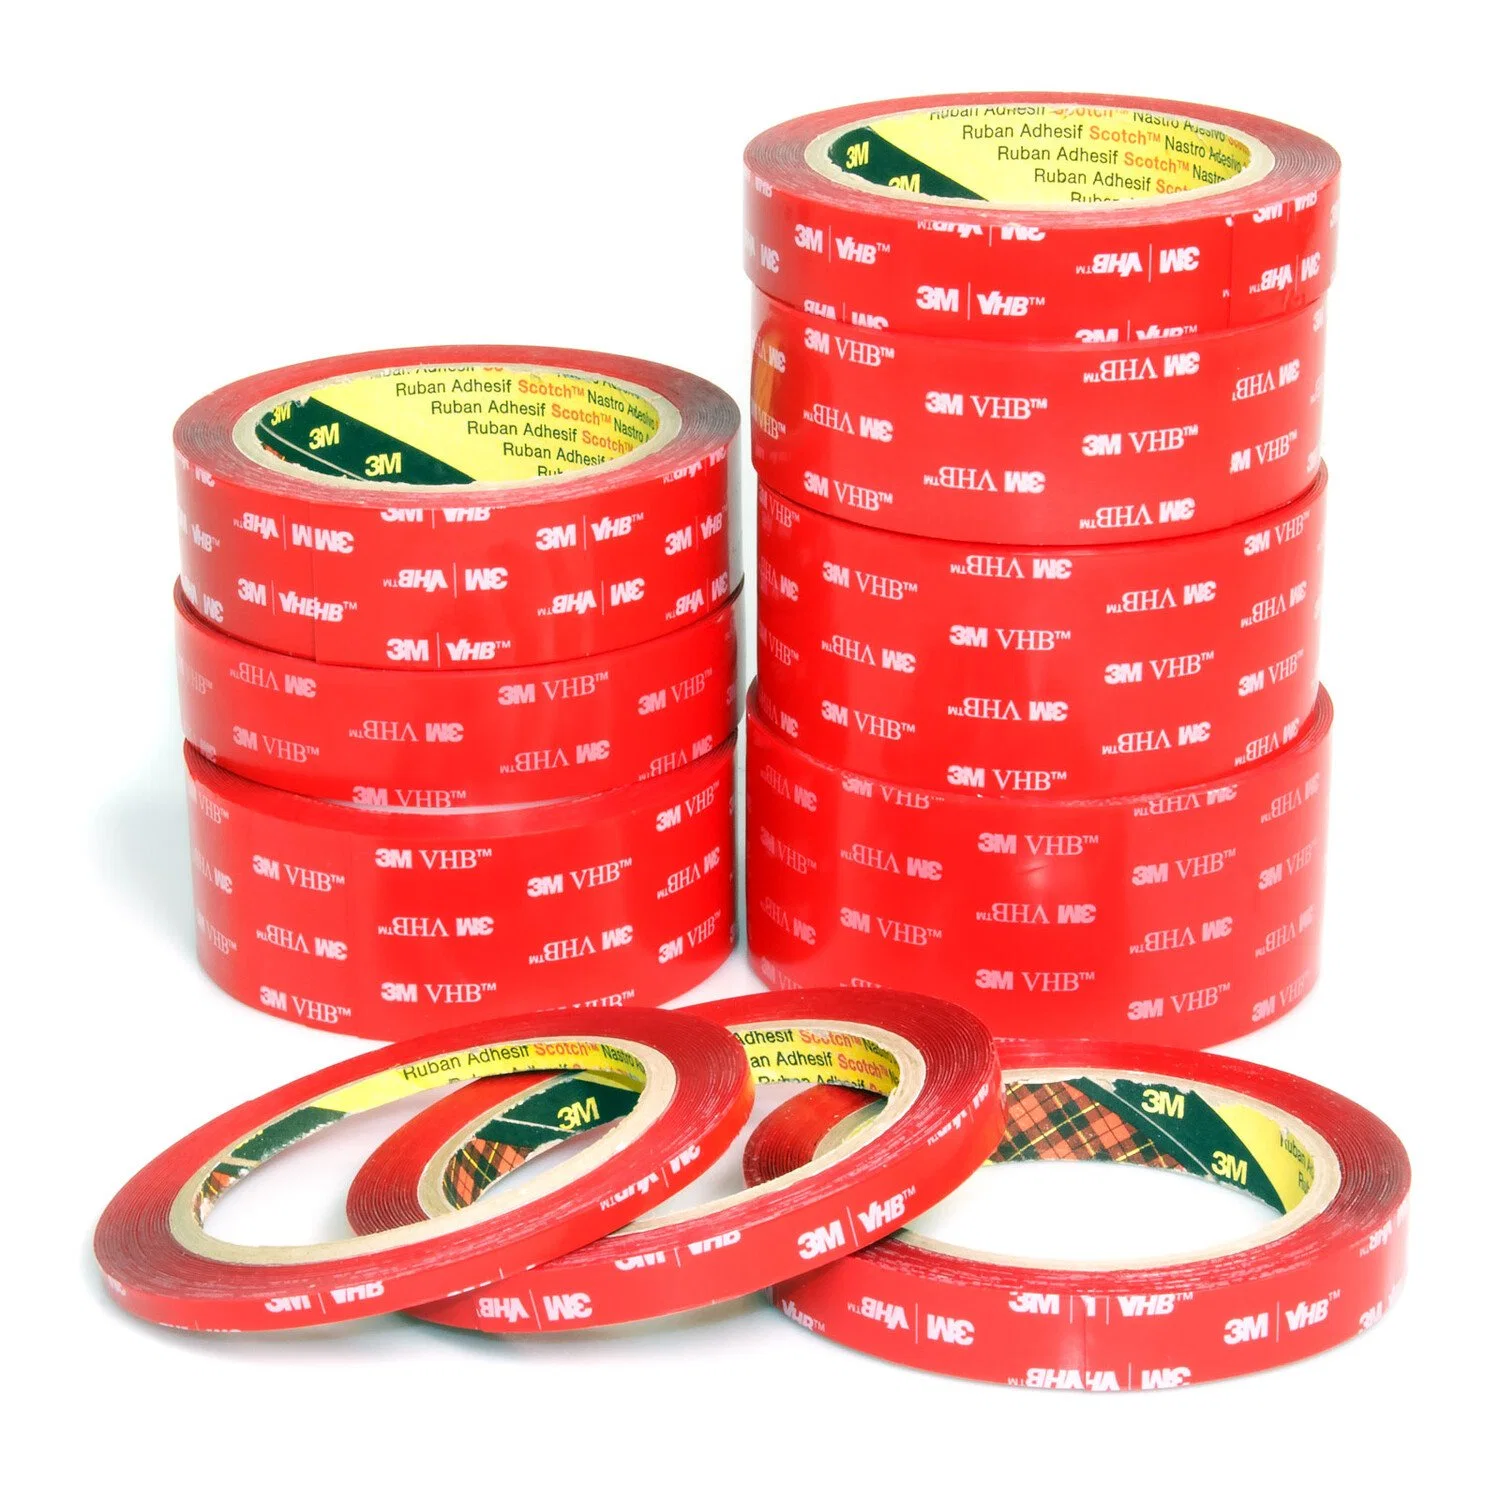 3m Clear Vhb 4905 4910 4915 4918 Double Sided Acrylic Foam Tape for Metal, Glass and Plastics Bonding